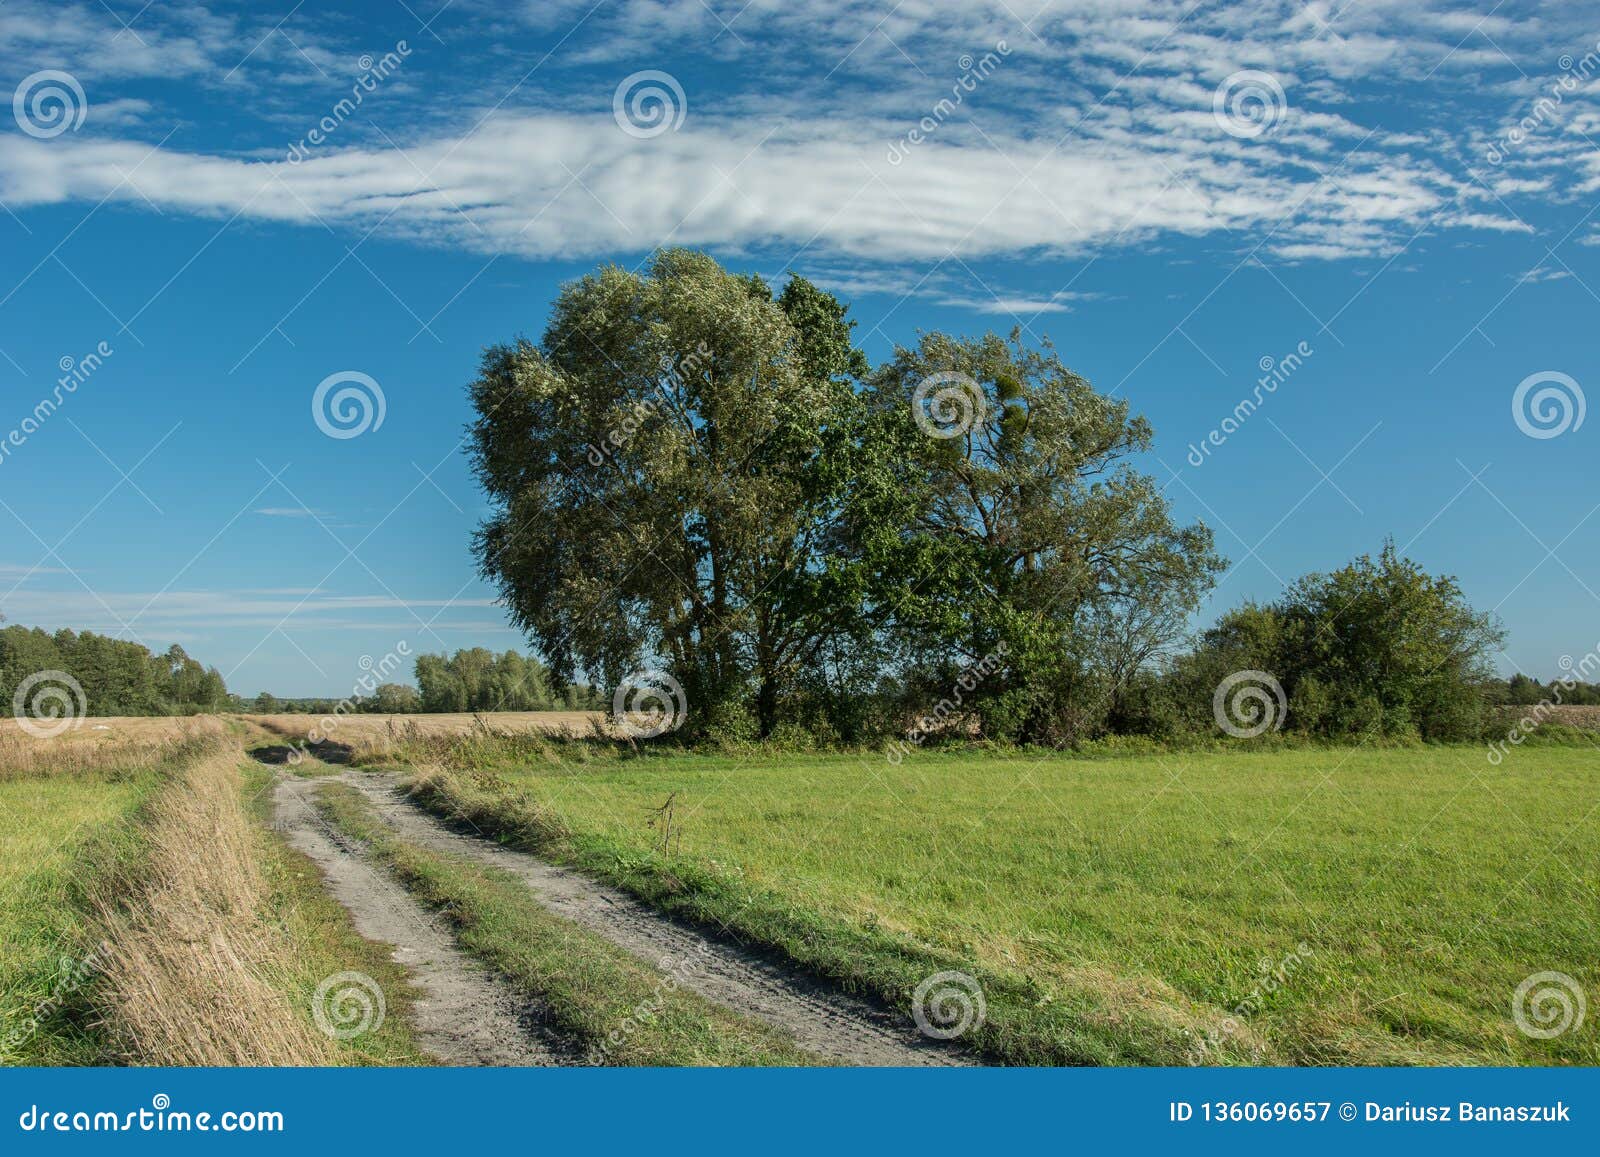 Big Trees Growing By The Country Road Stock Image Image Of Landscape